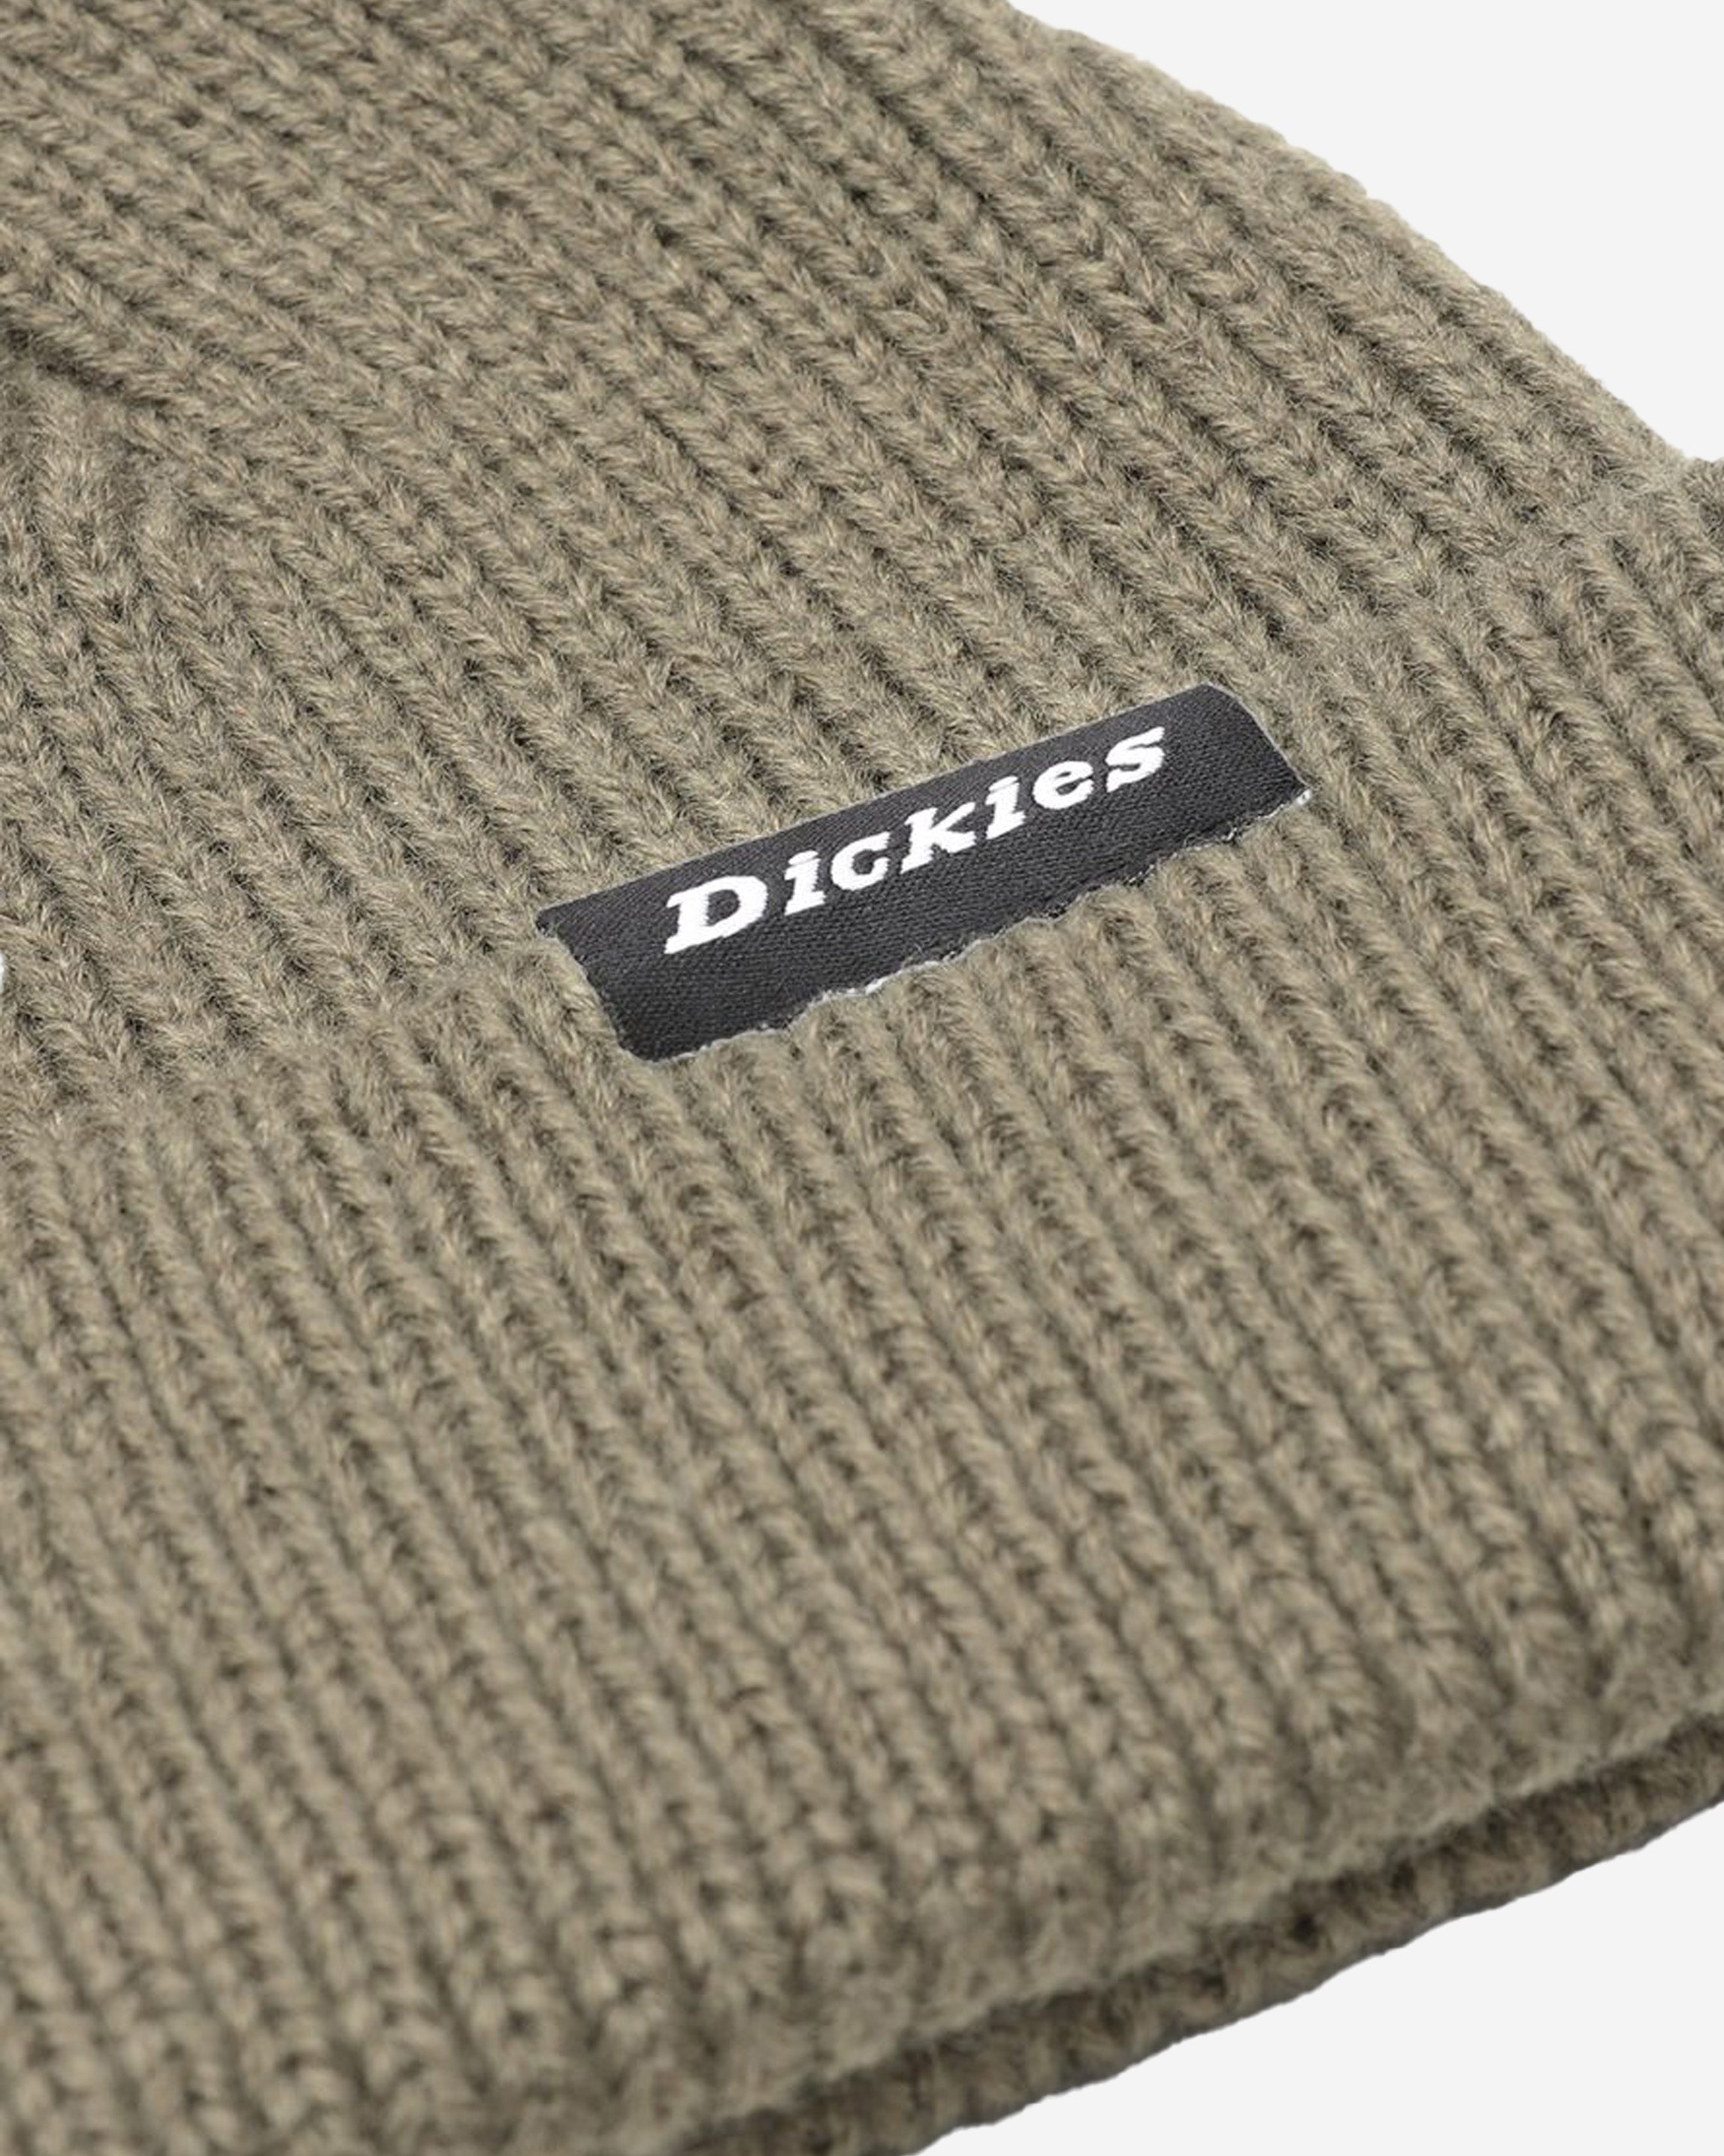 Get the perfect outdoor look with the classic Woodworth beanie hat. Made from anti-bobble acrylic that's easy to wash, this basic hat is built for warmth and will look good with whatever you have on. Available in several muted shades